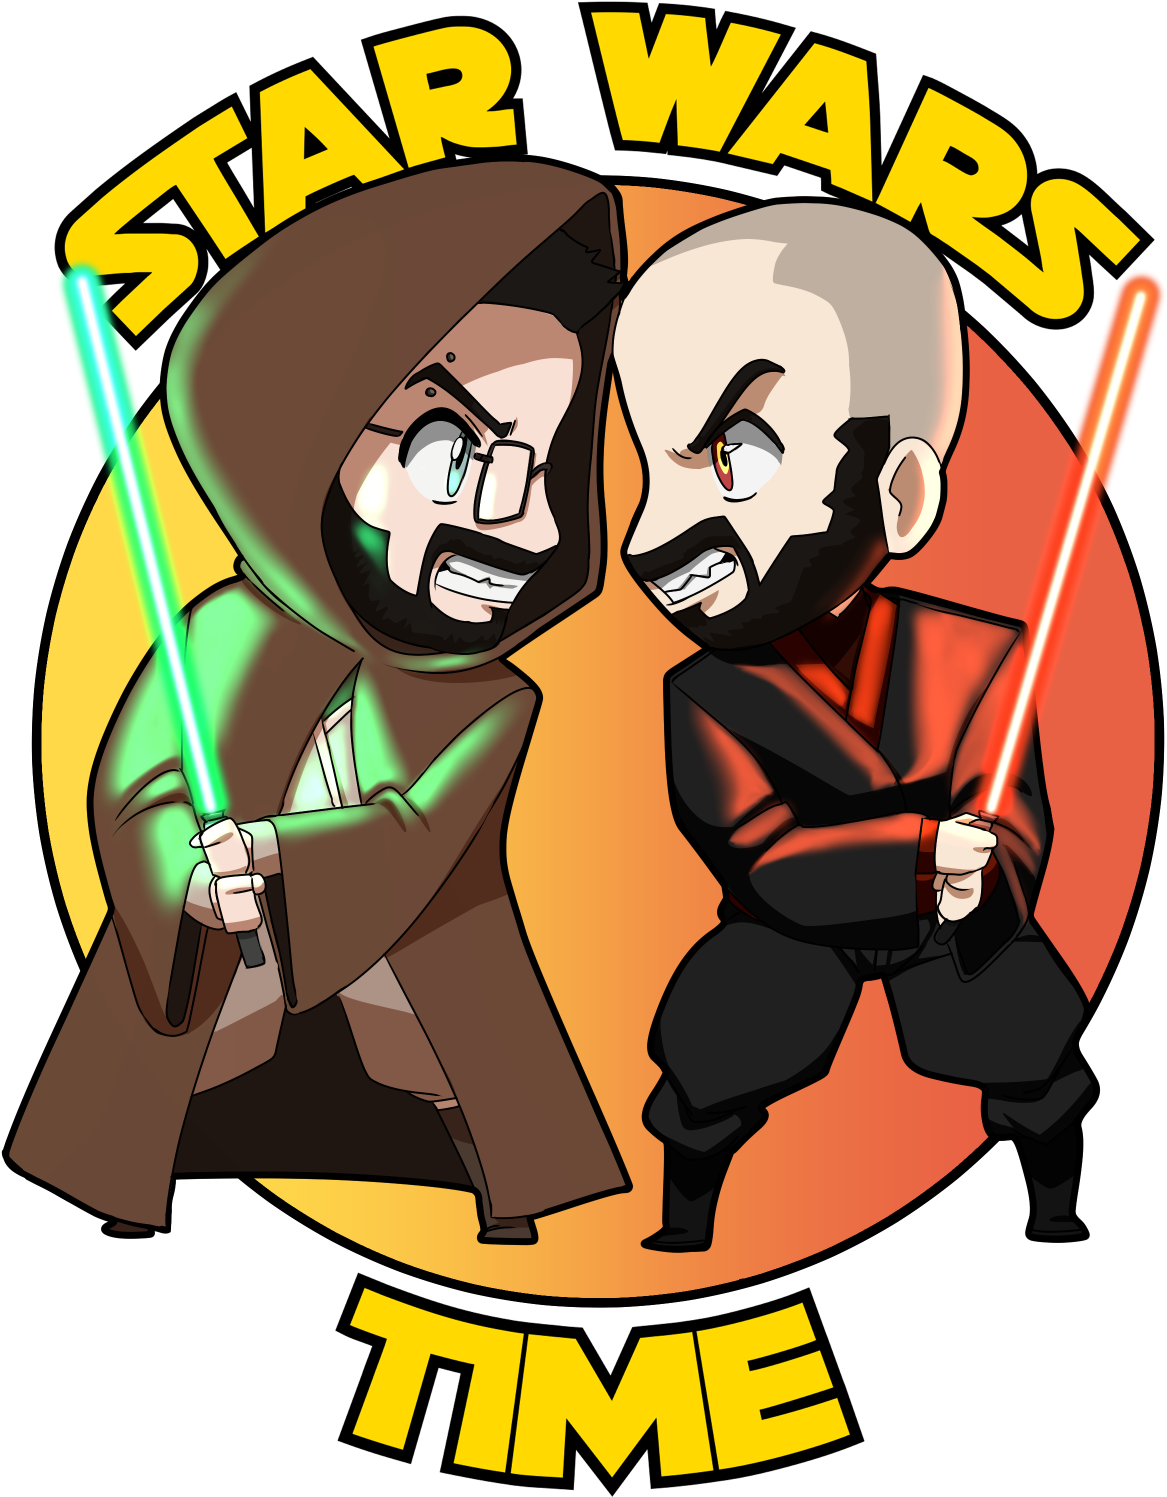 Cartoon Characters With Lightsabers In Their Hands